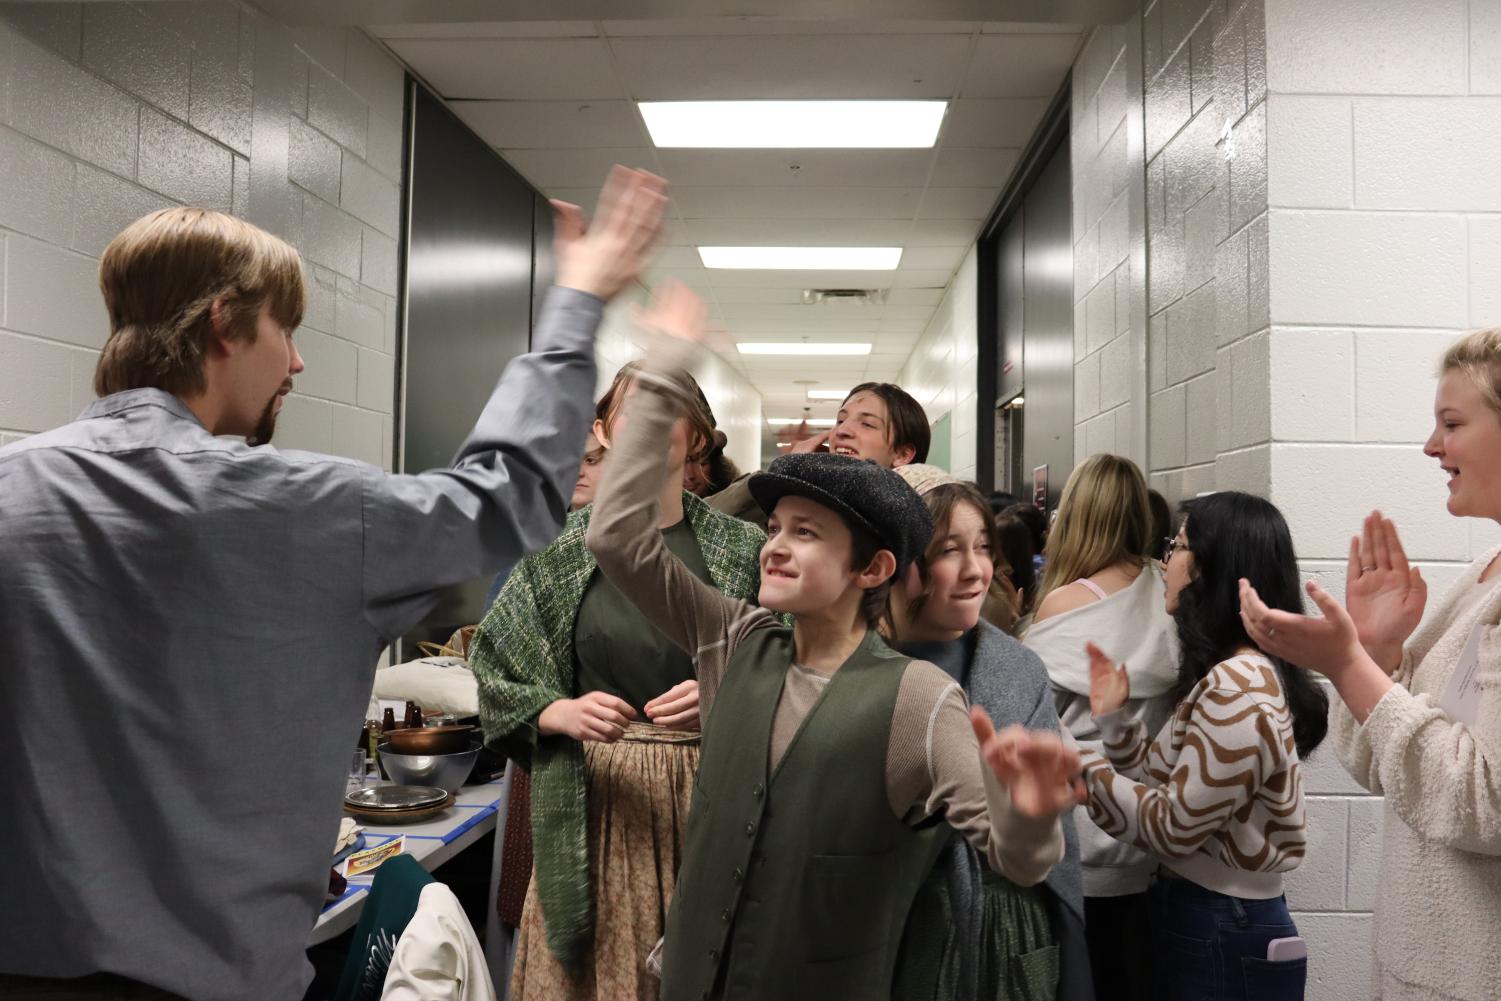 Behind+the+scenes+of+Fiddler+on+the+Roof